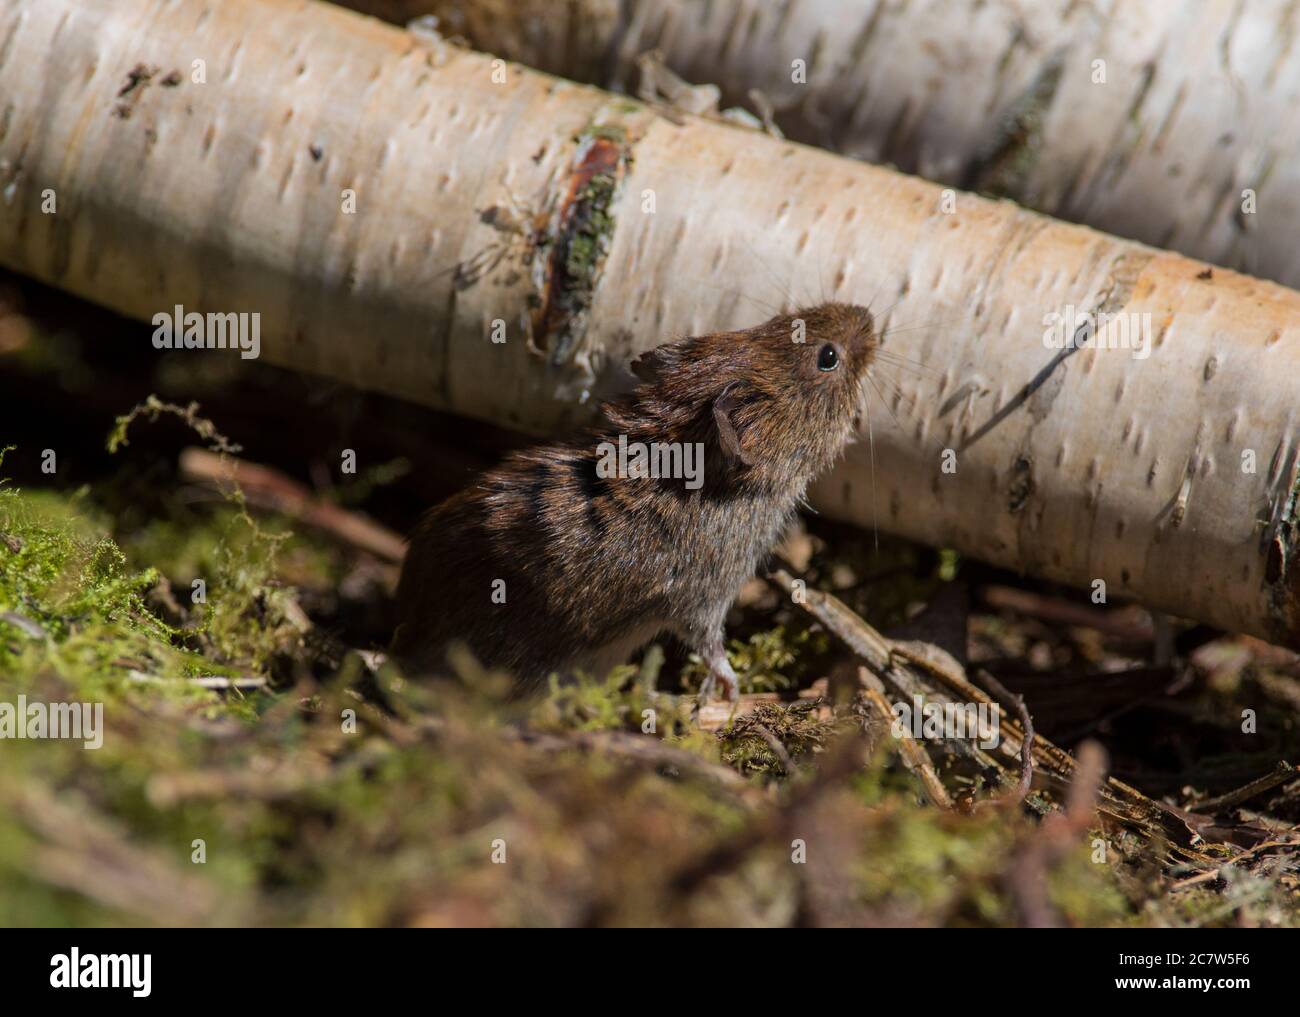 Bank Vole (Clethrionomys glareolus) in a silver birch forest in the United Kingdom. Stock Photo